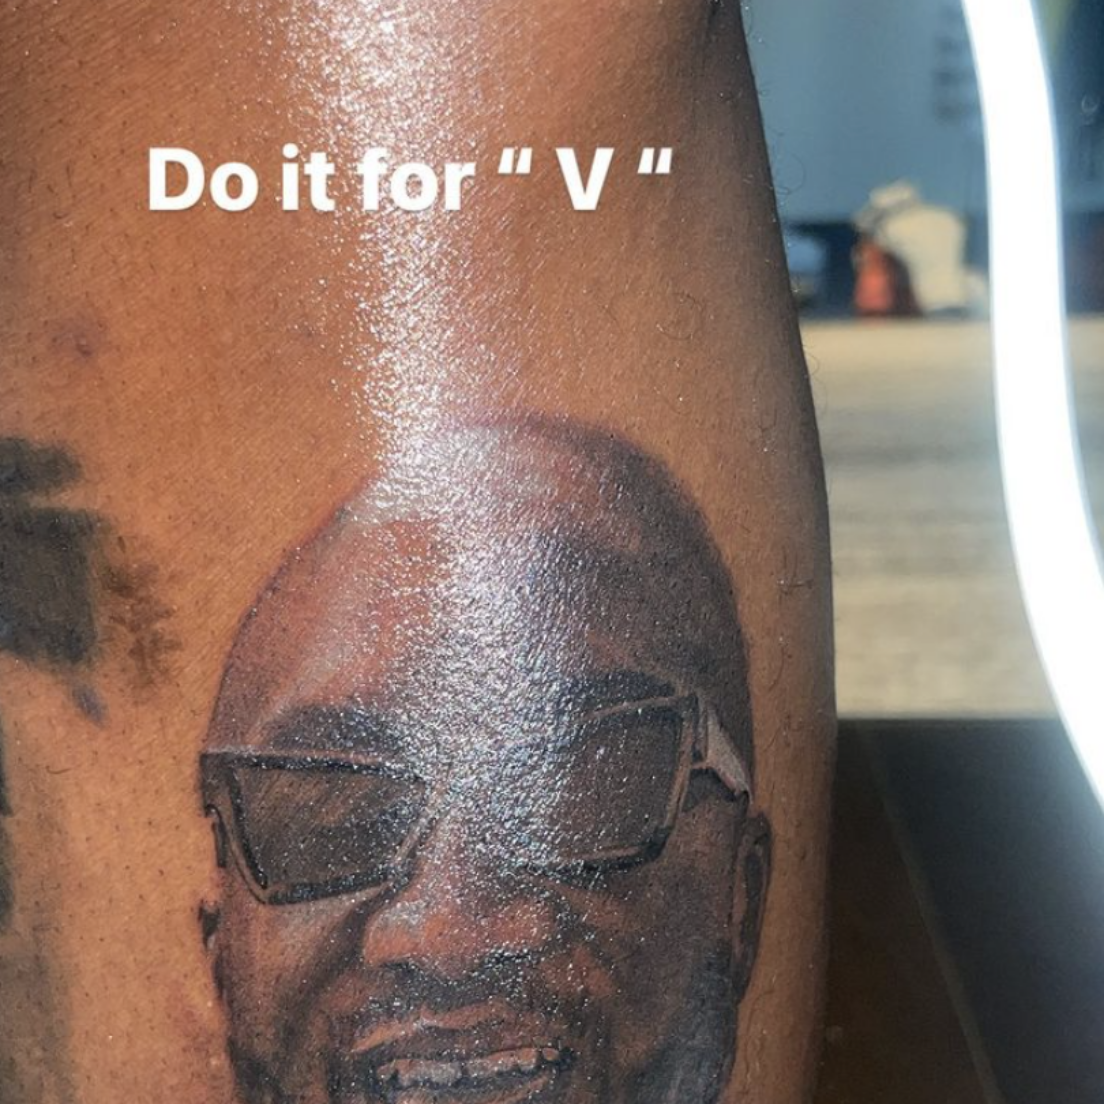 Virgil Abloh portrait tattoo located on the upper arm.